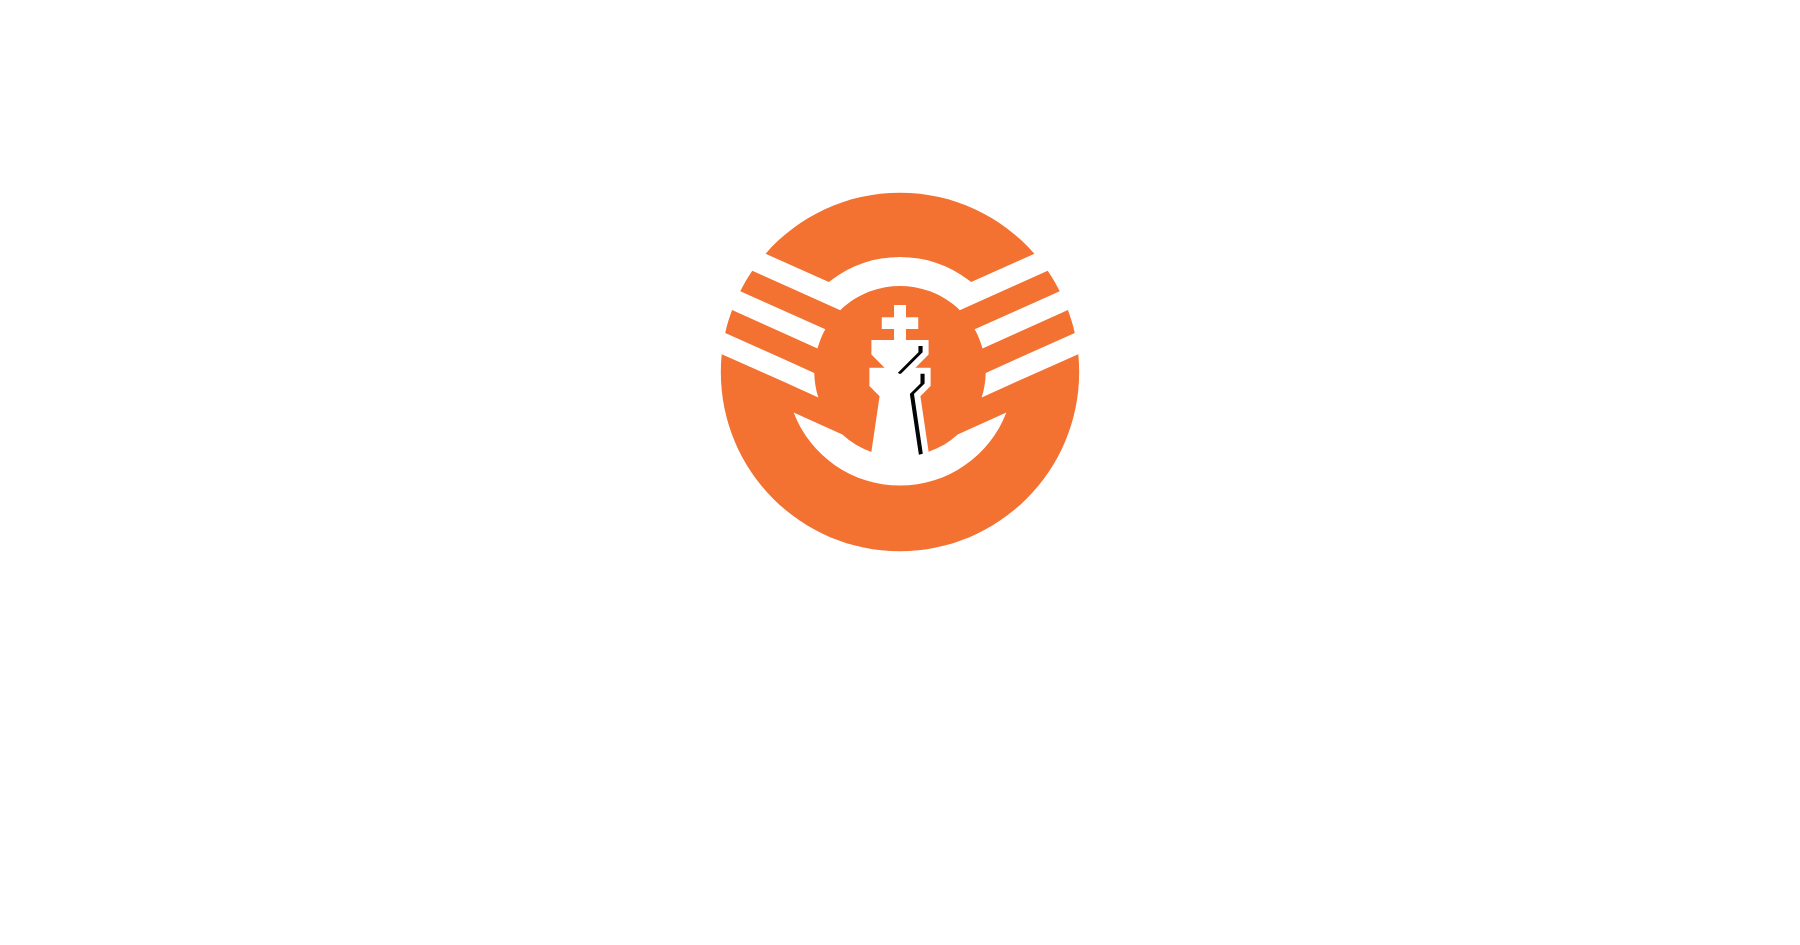 Multiplayer Rating System. No Friction.